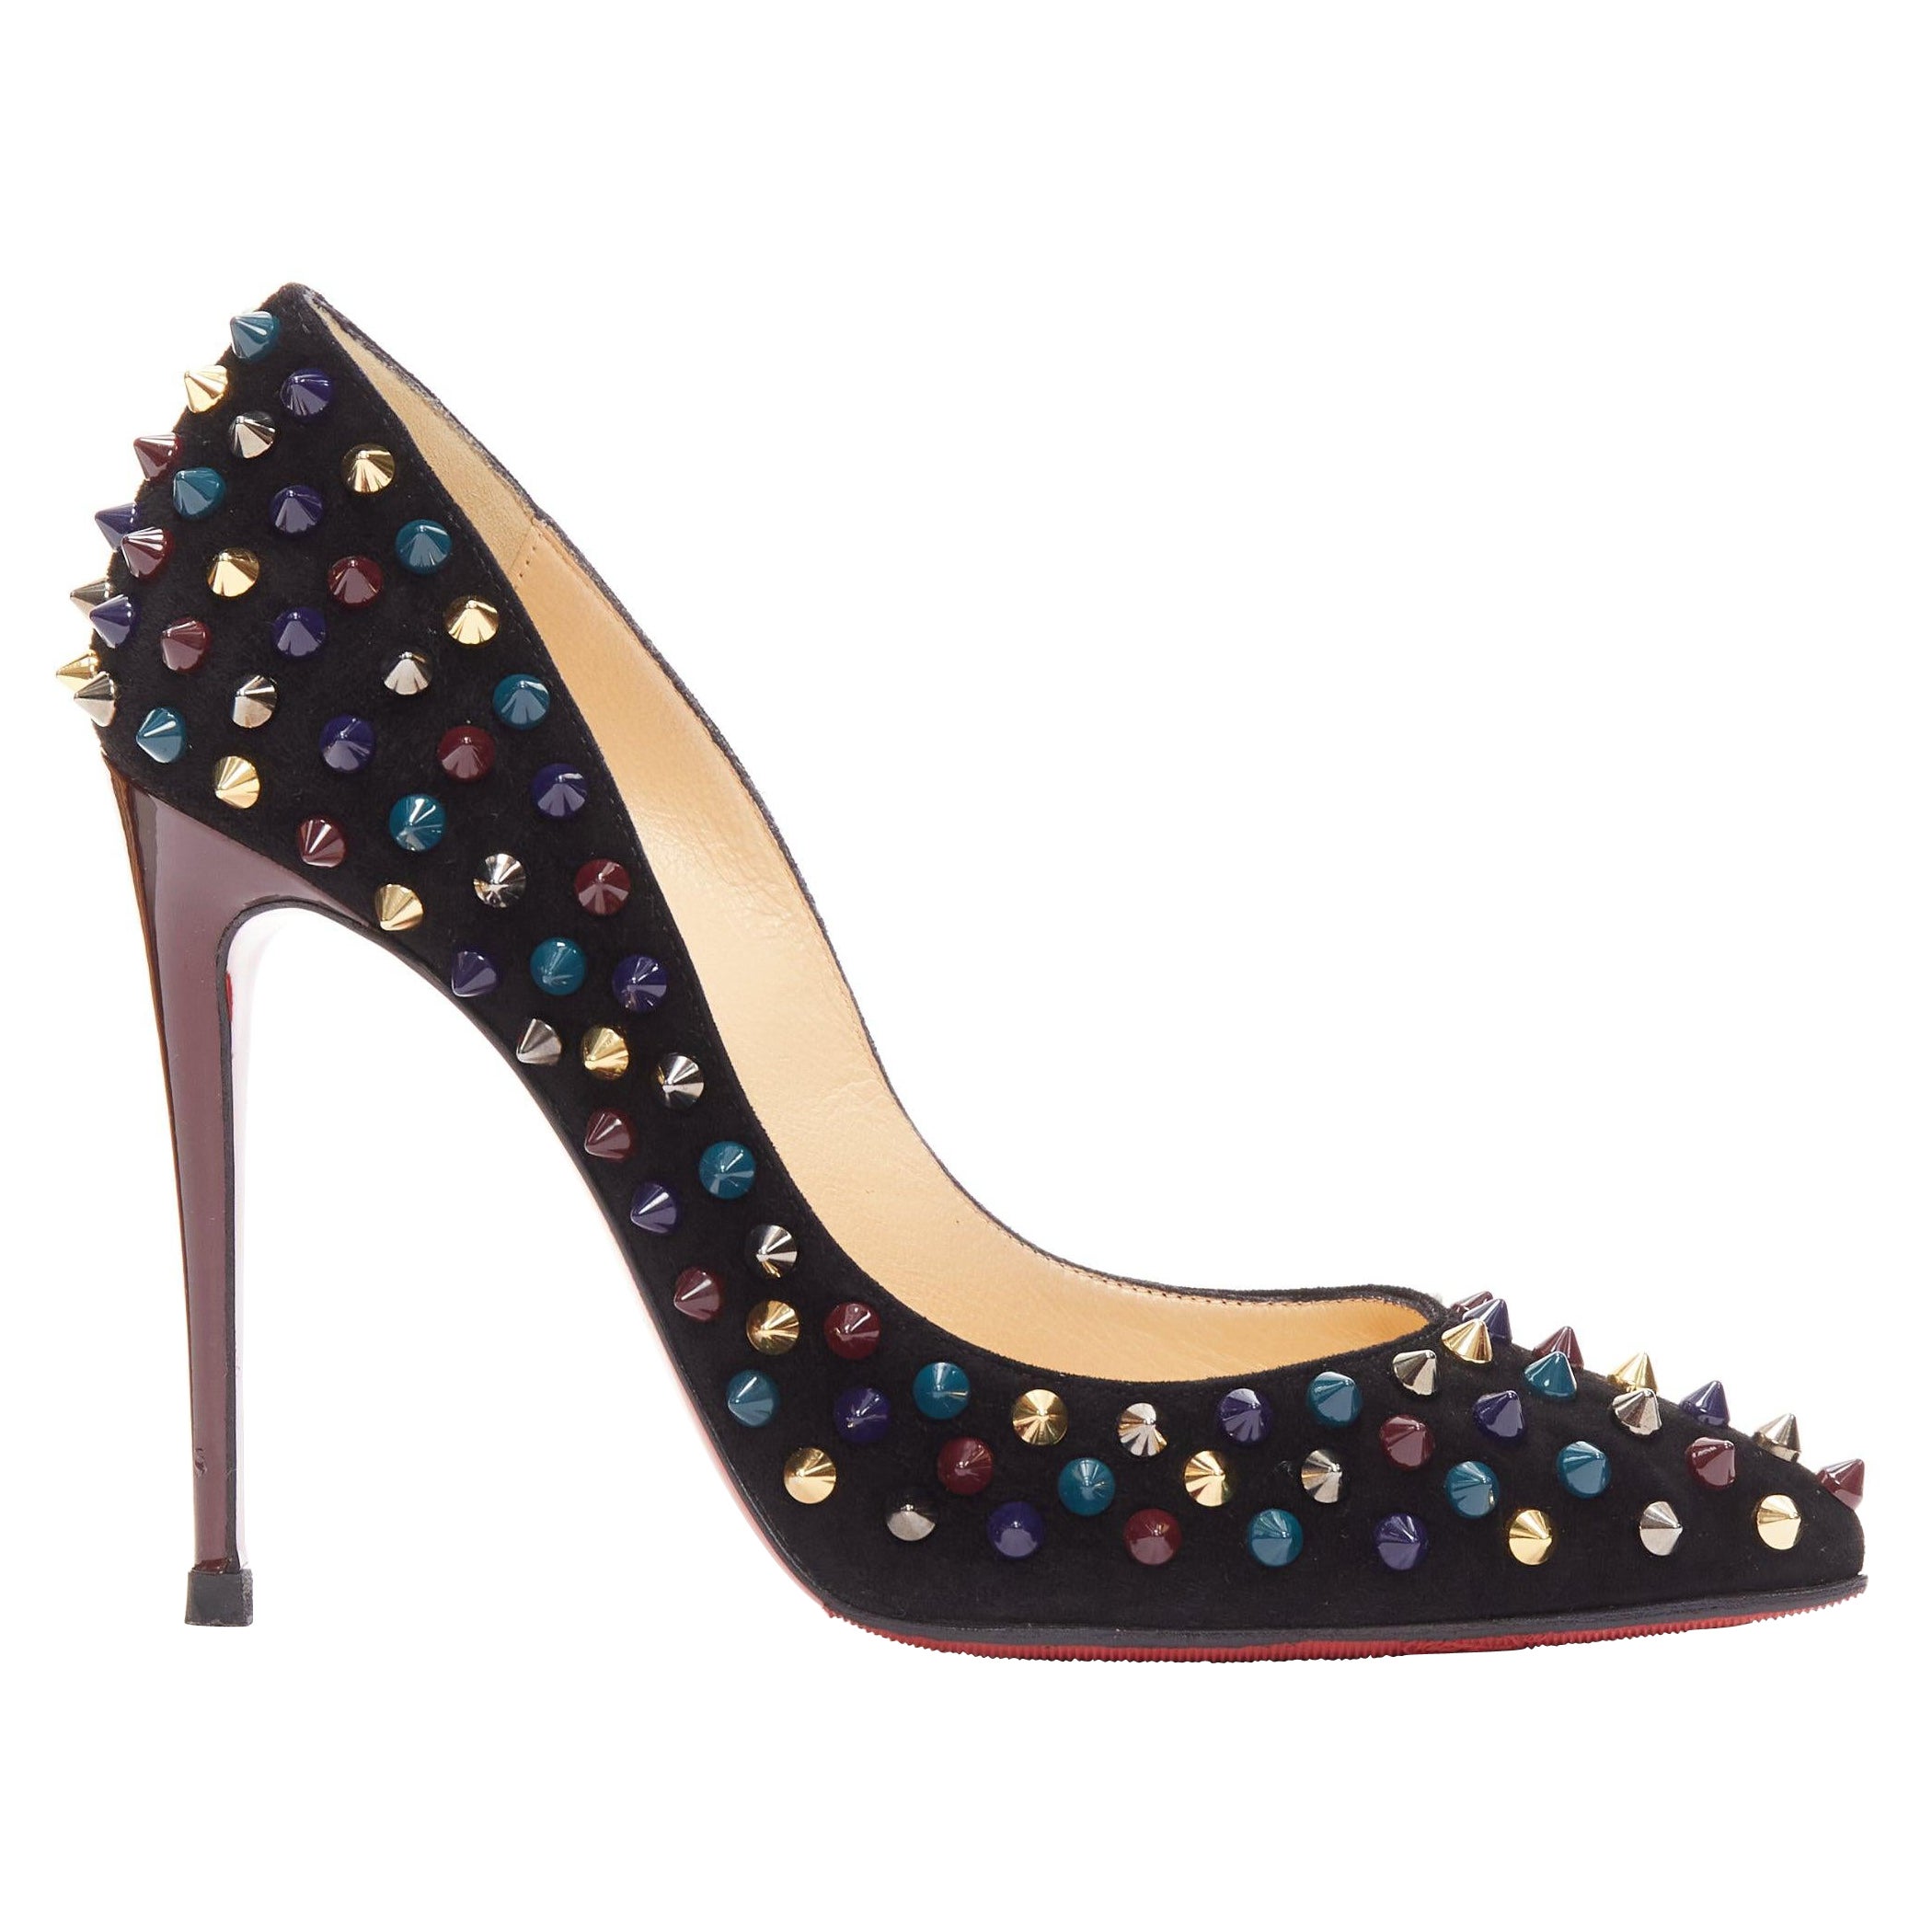 CHRISITAN LOUBOUTI Follies Spikes black suede jewely tone spike pigalle EU36 For Sale